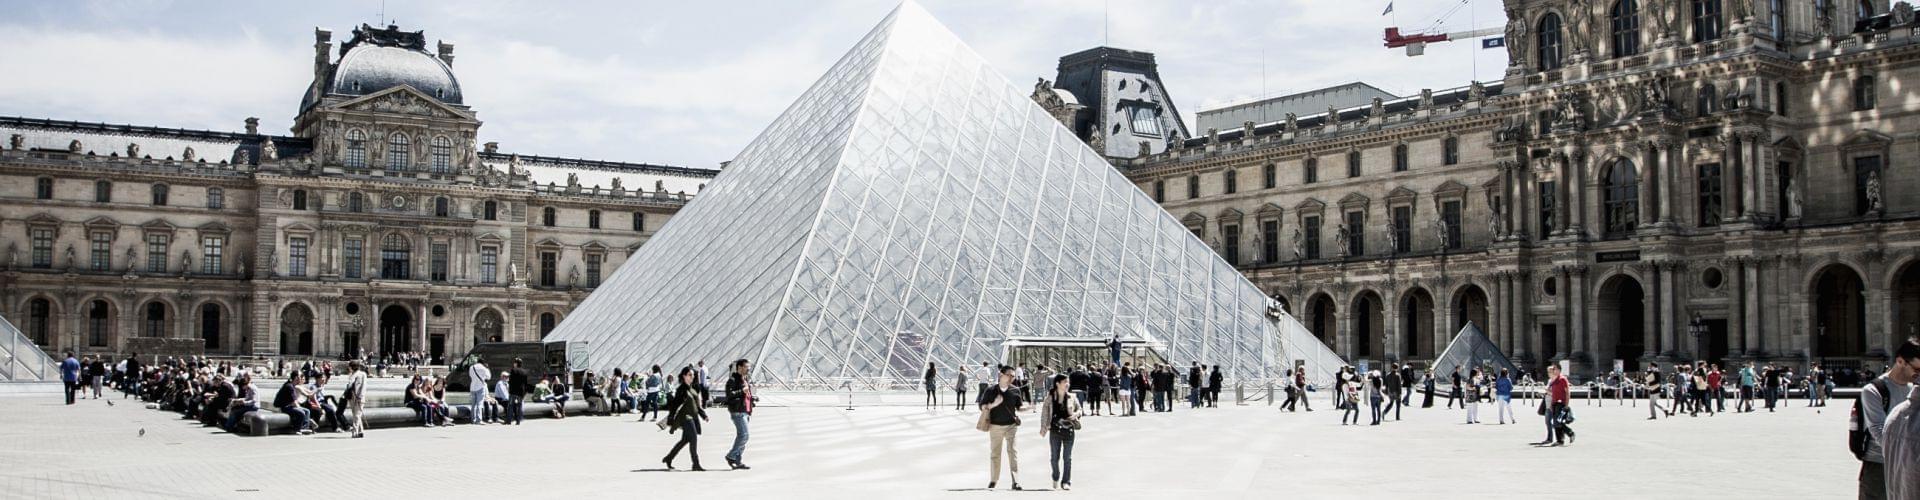 What To Do in Paris for LGBTQ Travelers